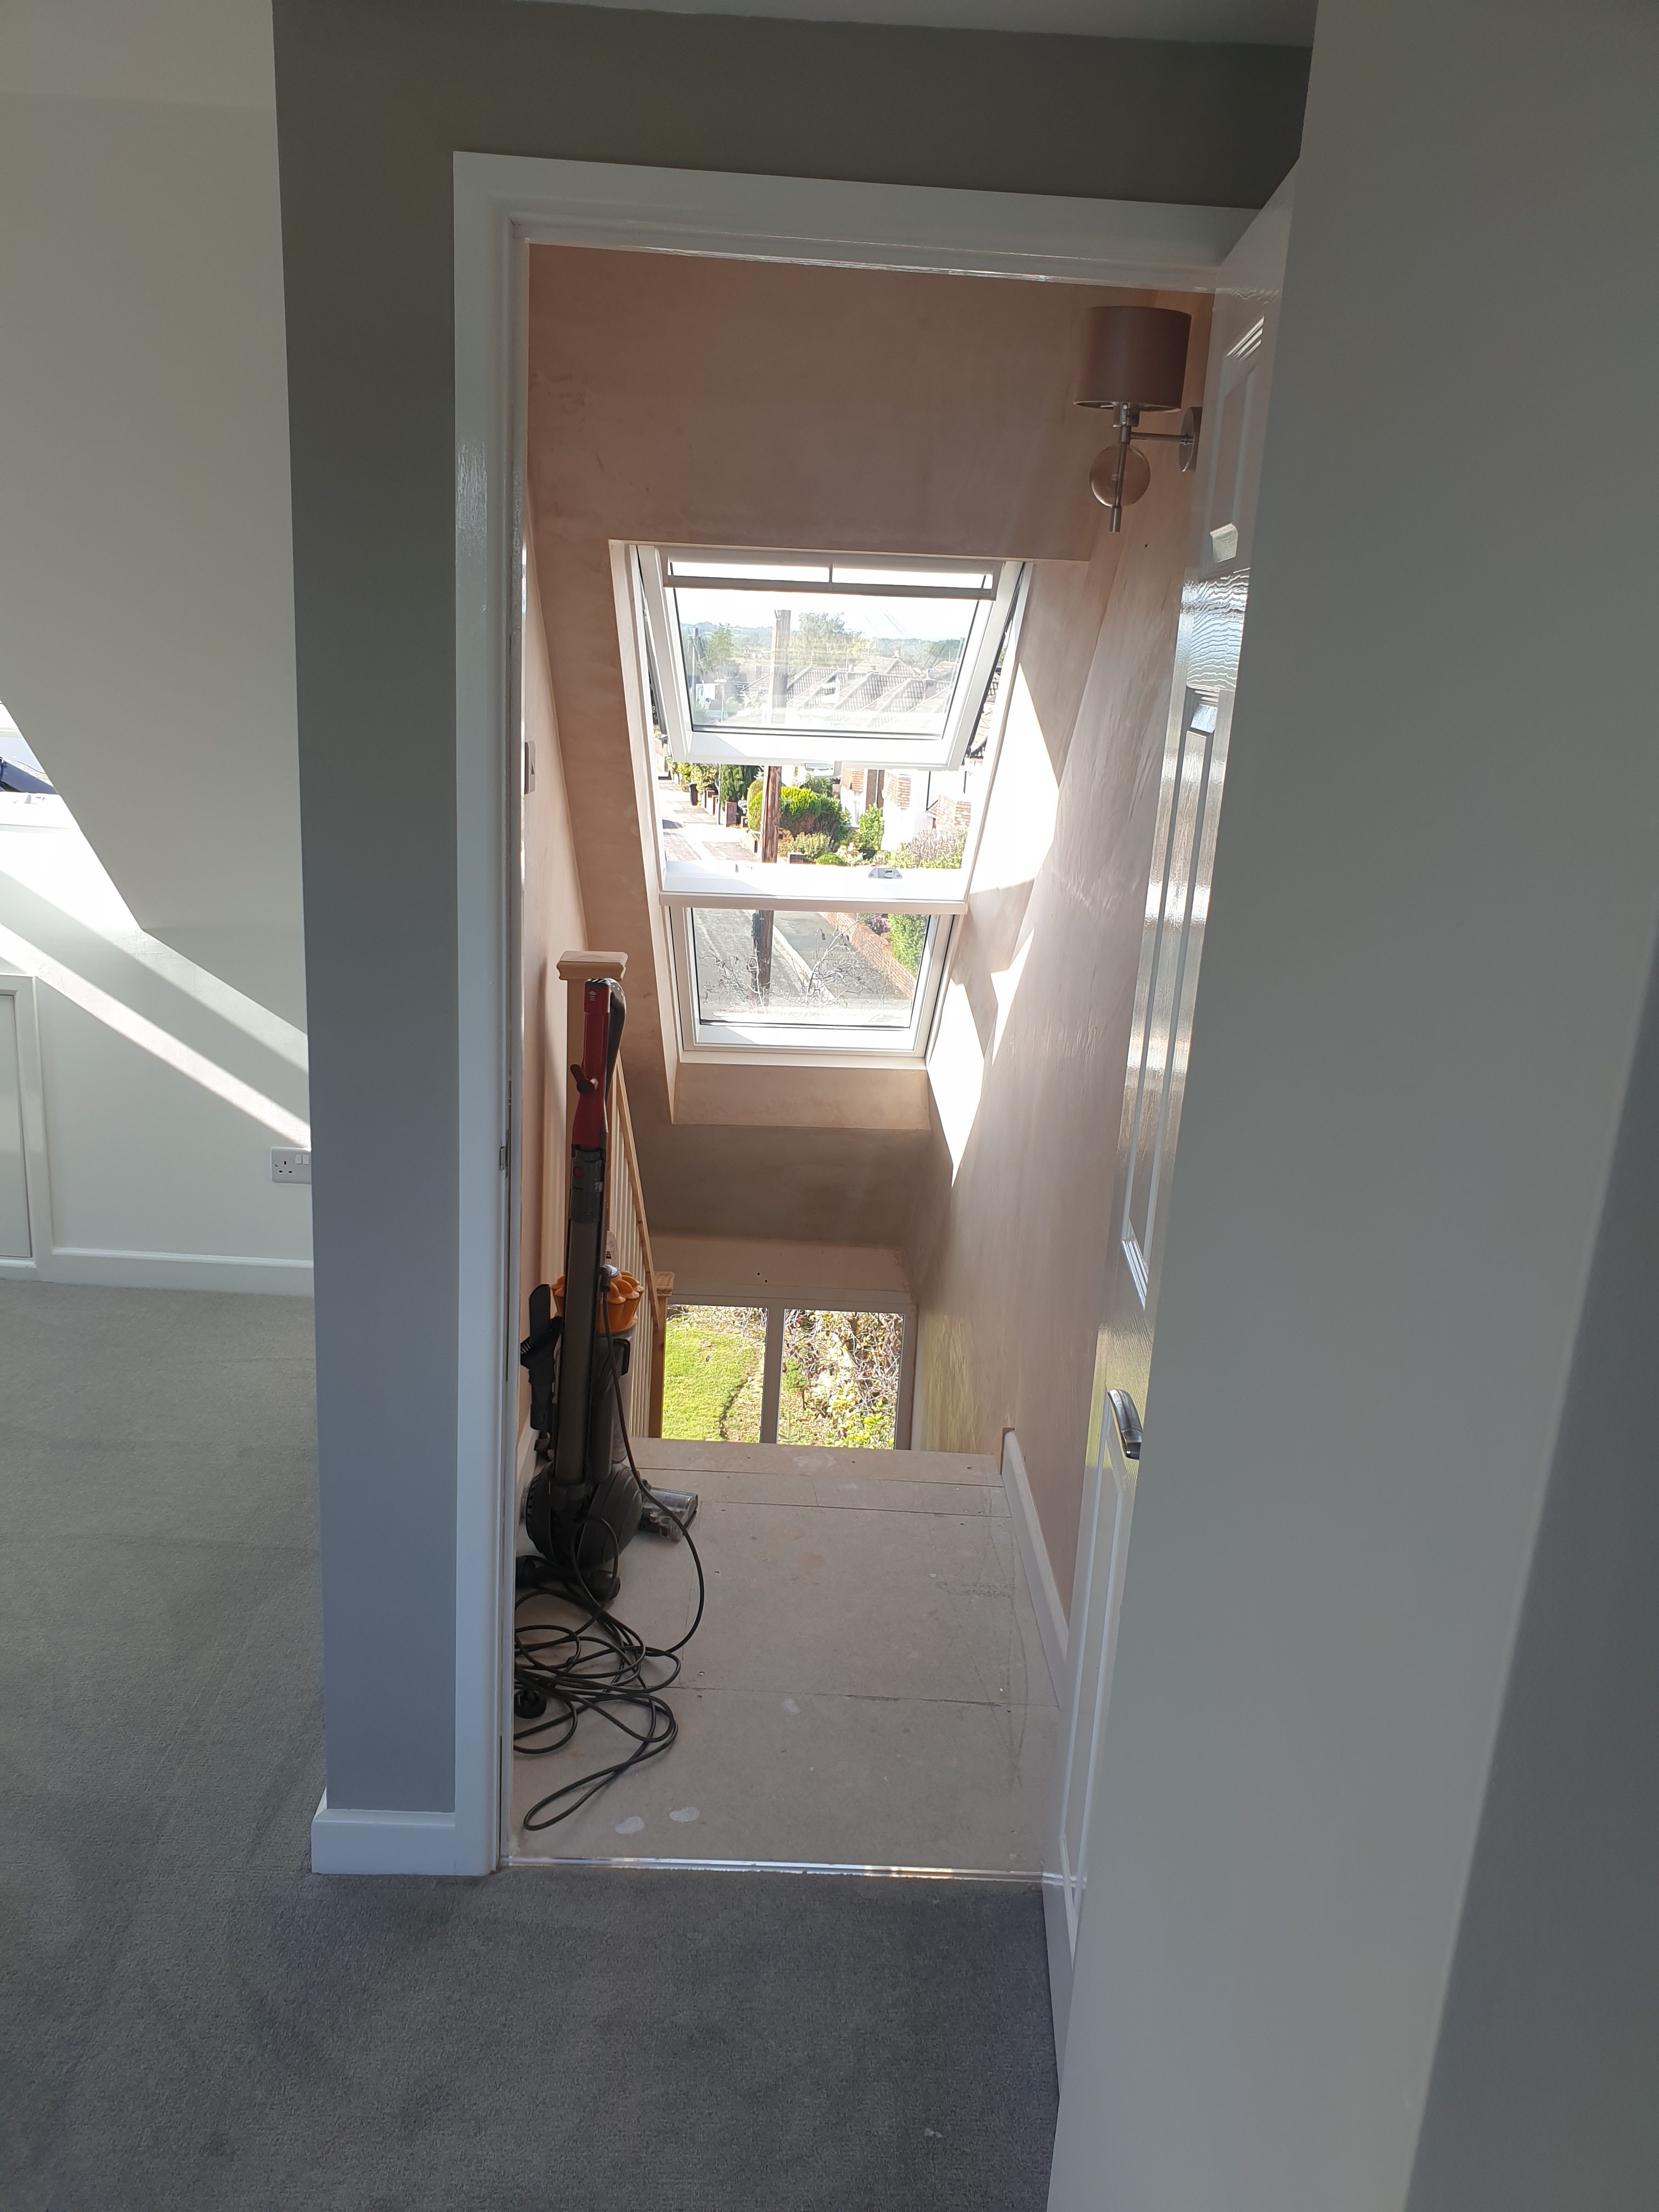 Staircase leading to loft conversion in Bristol